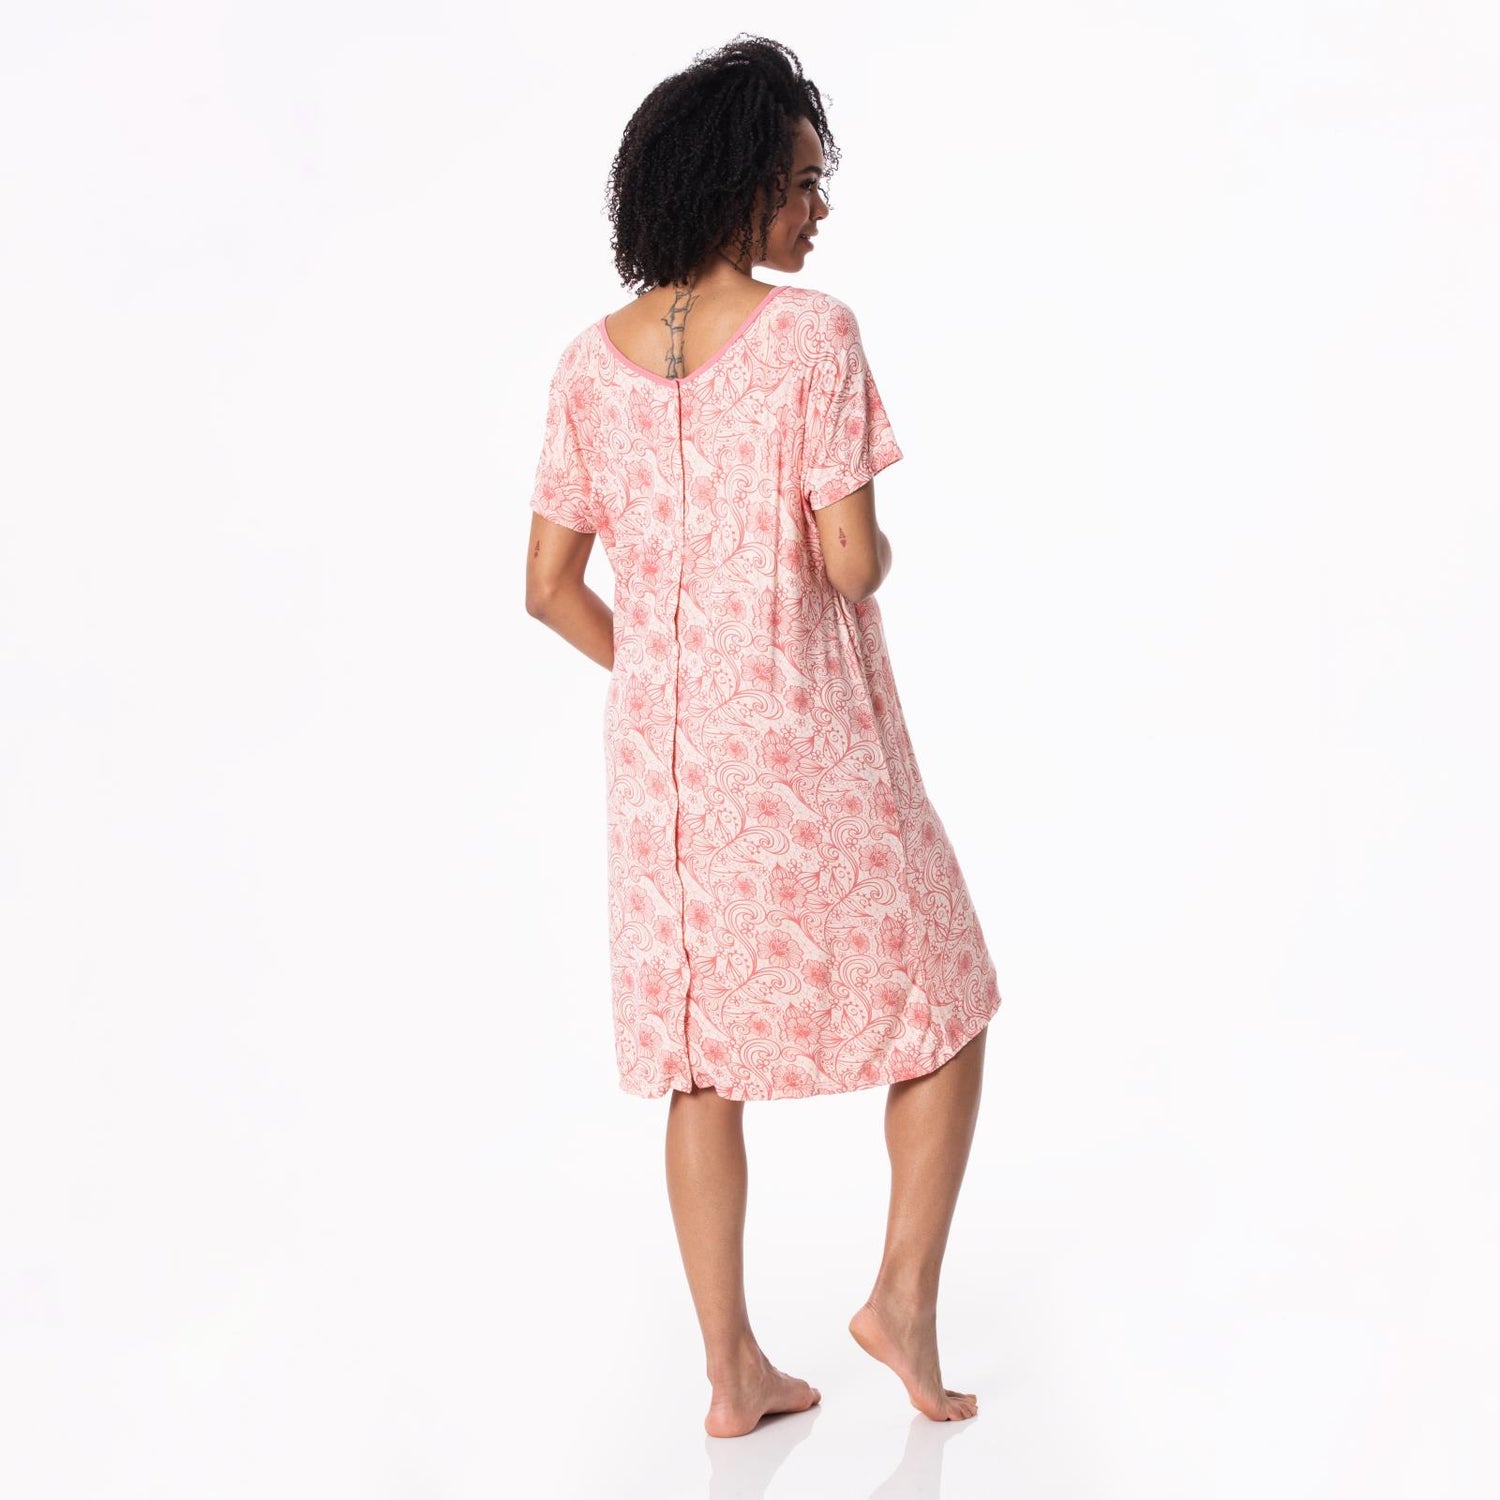 Women's Print Hospital Gown in Peach Blossom Lace